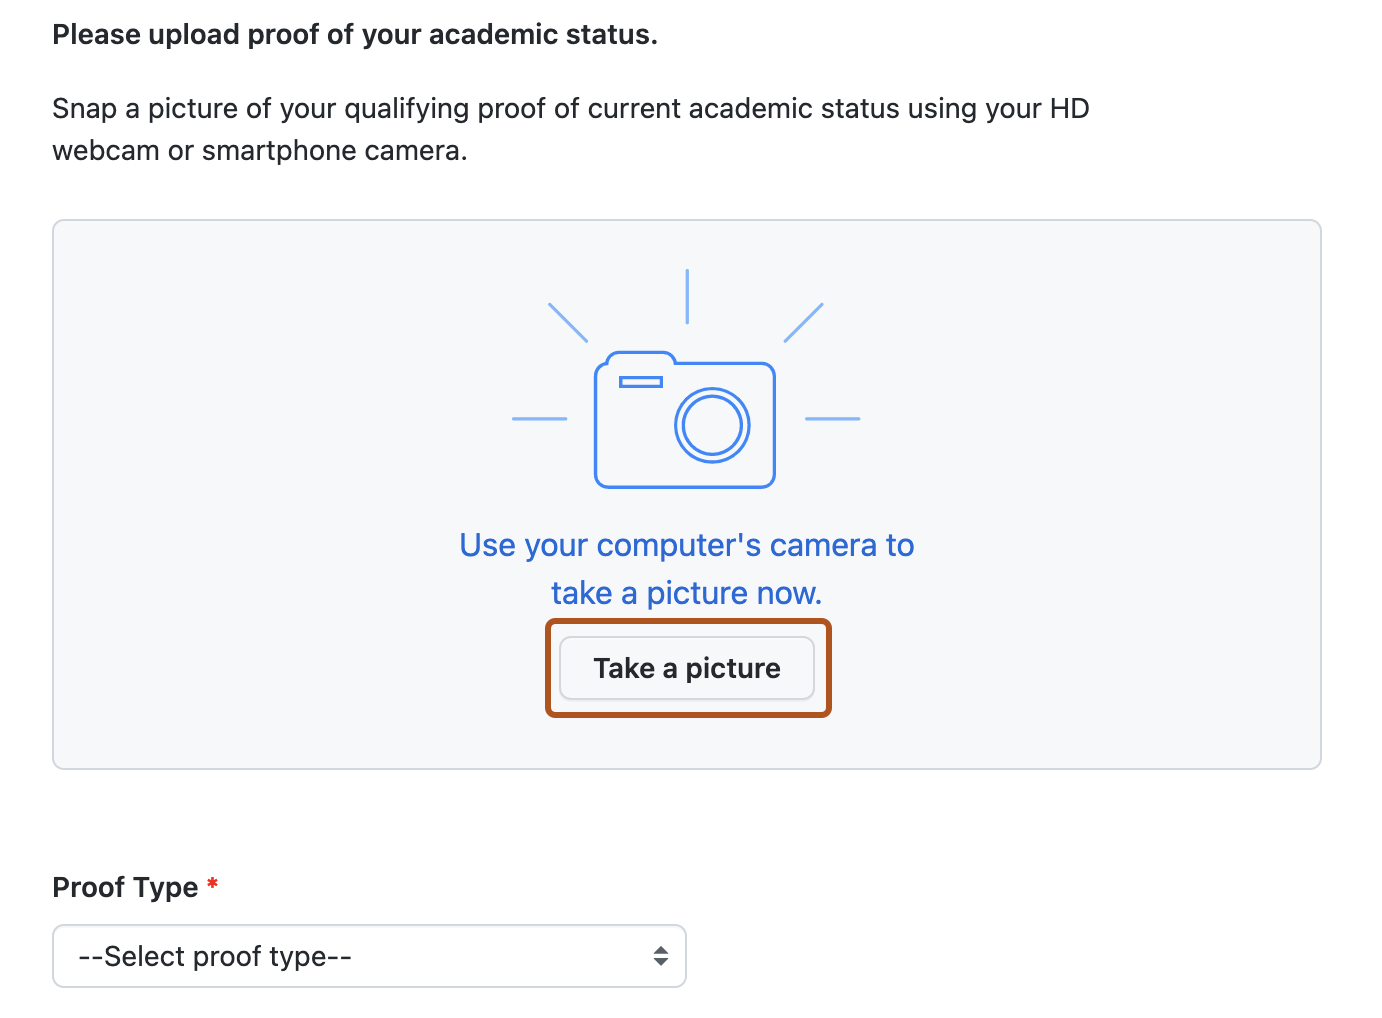 Screenshot of page for providing photo proof of your academic status. The "Take a picture" button is outlined in dark orange.